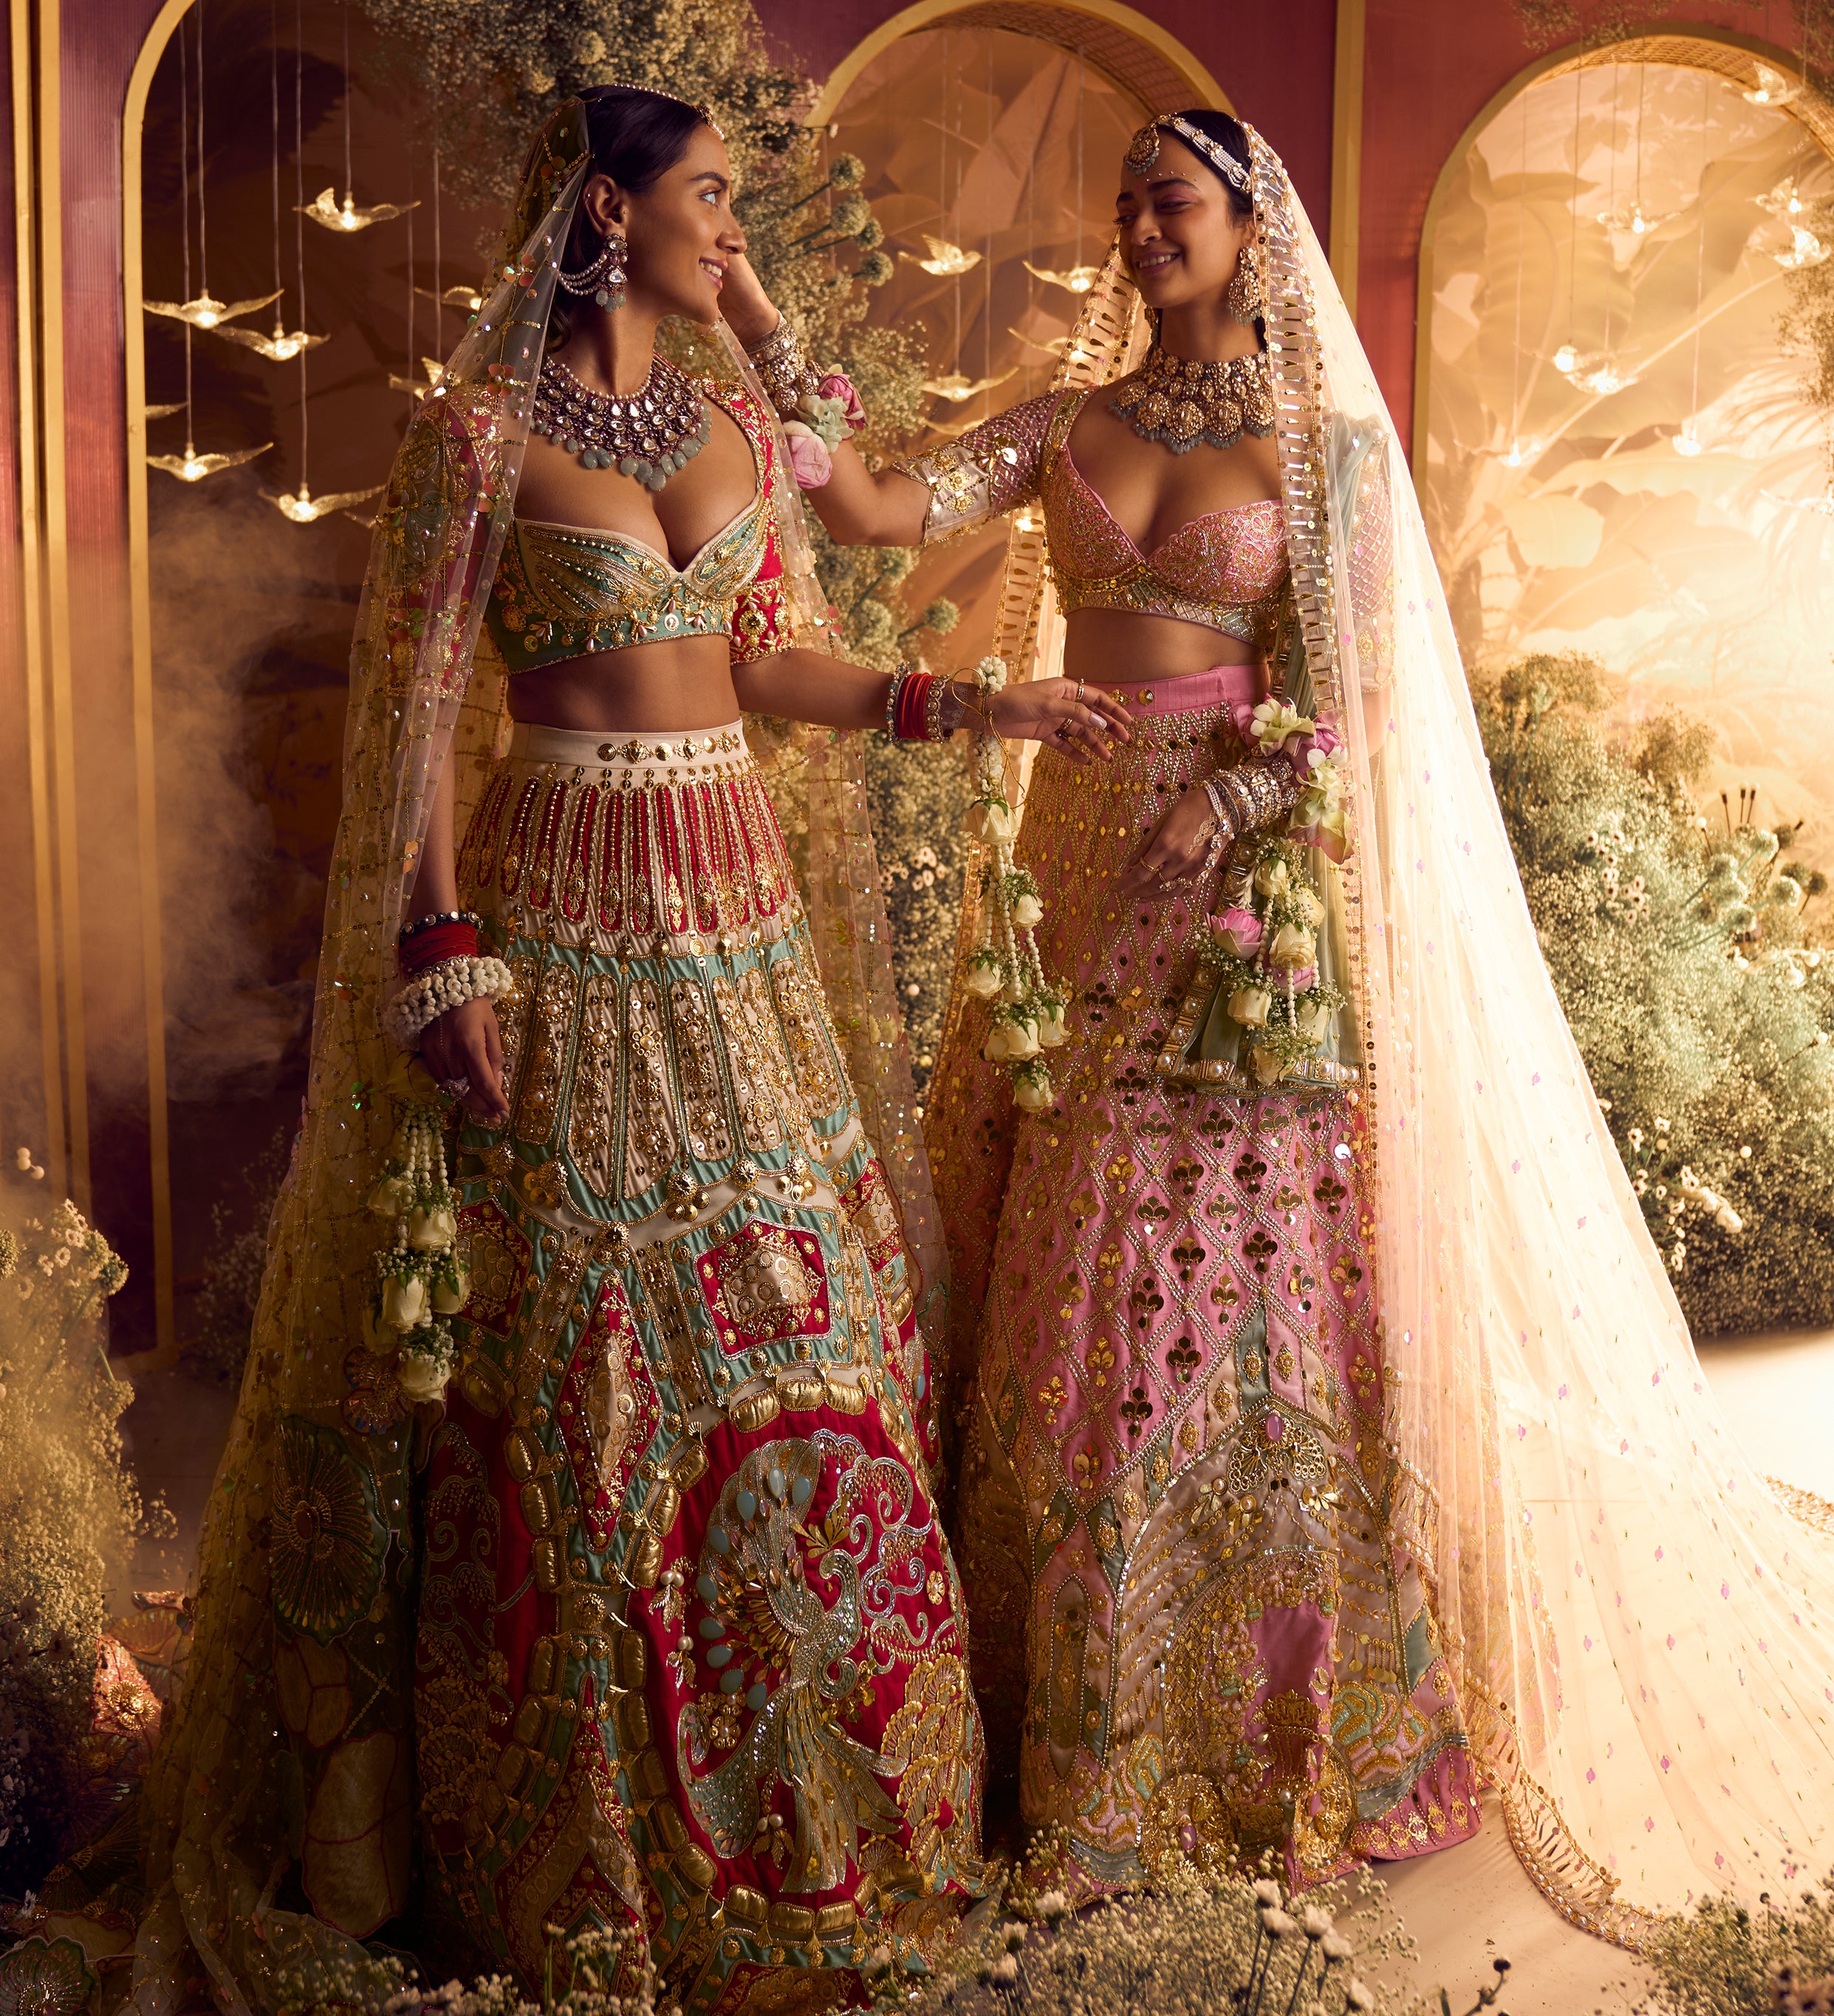 The Most Beautiful Wedding Dresses of All Time